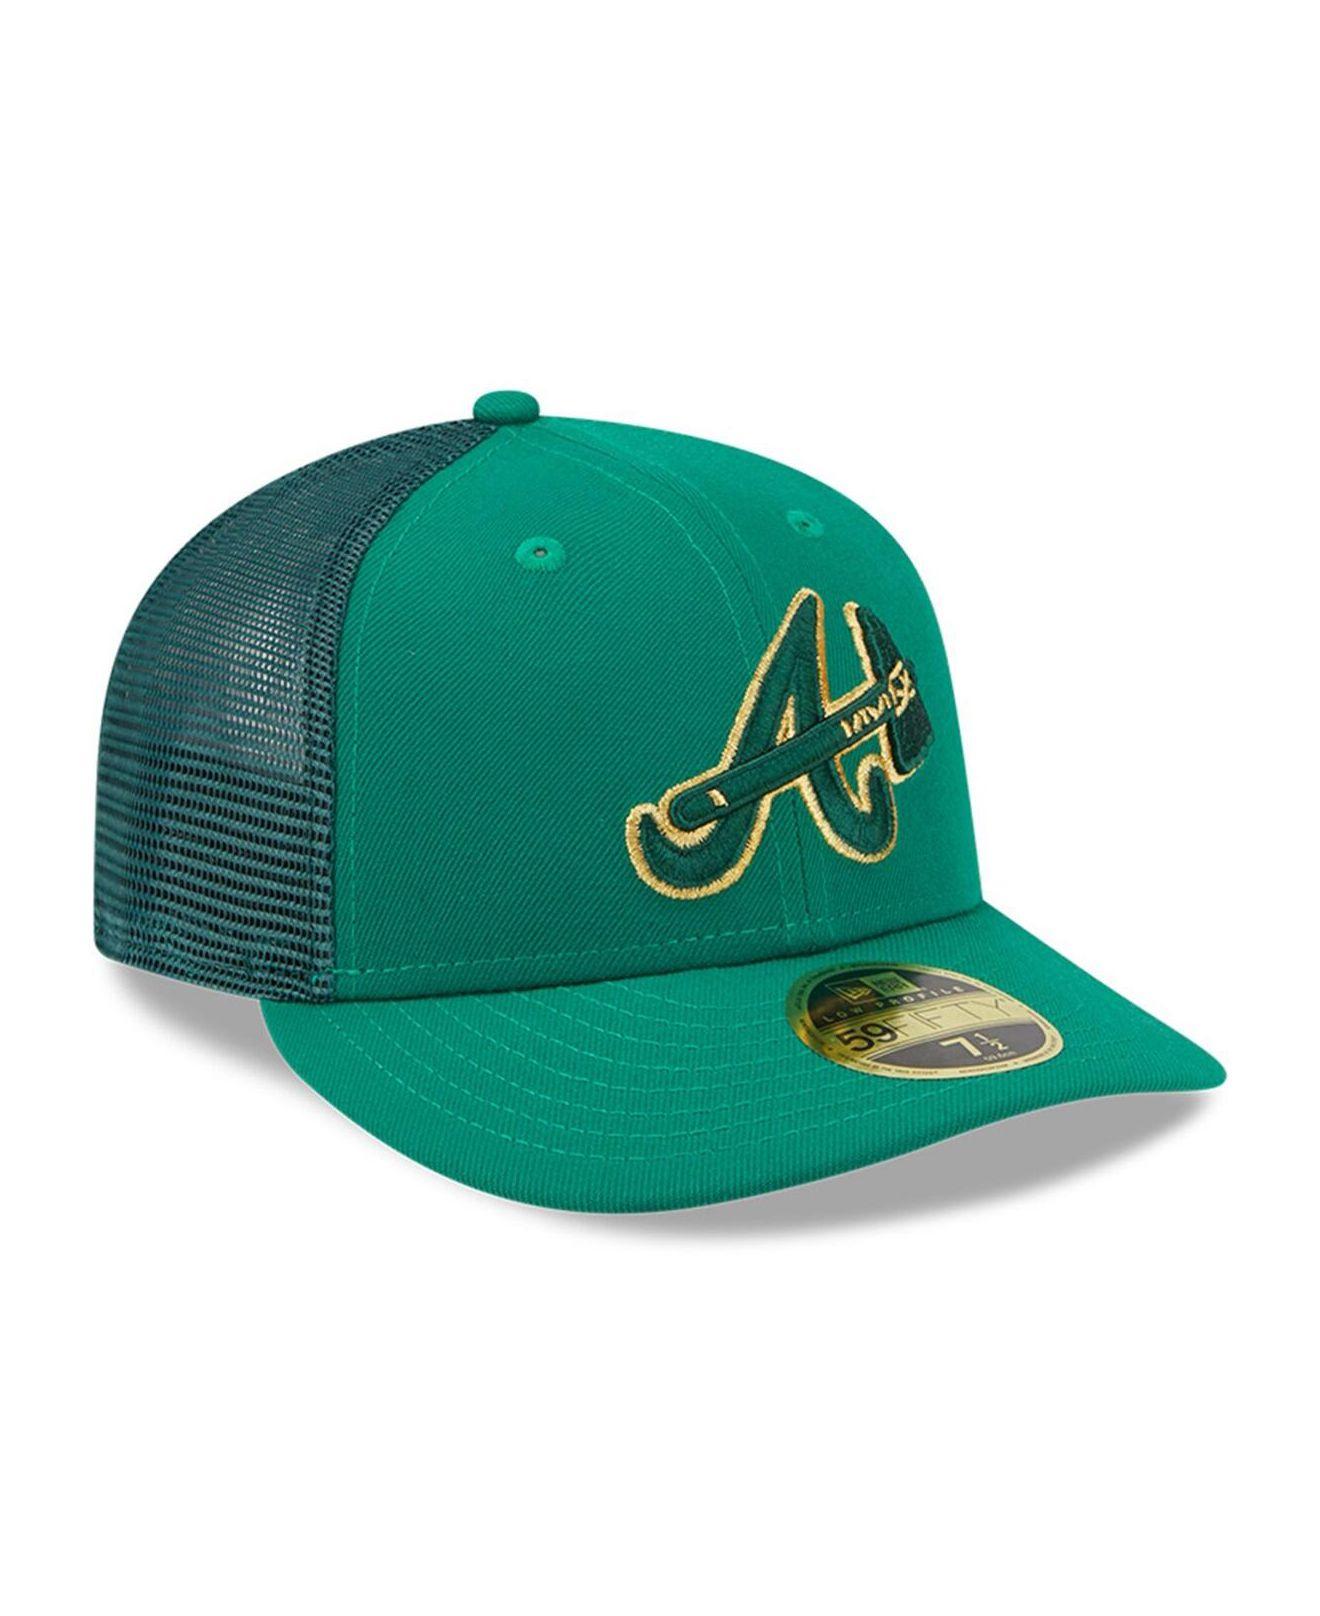 2023 Boston Red Sox St. Patrick's Day hats out now